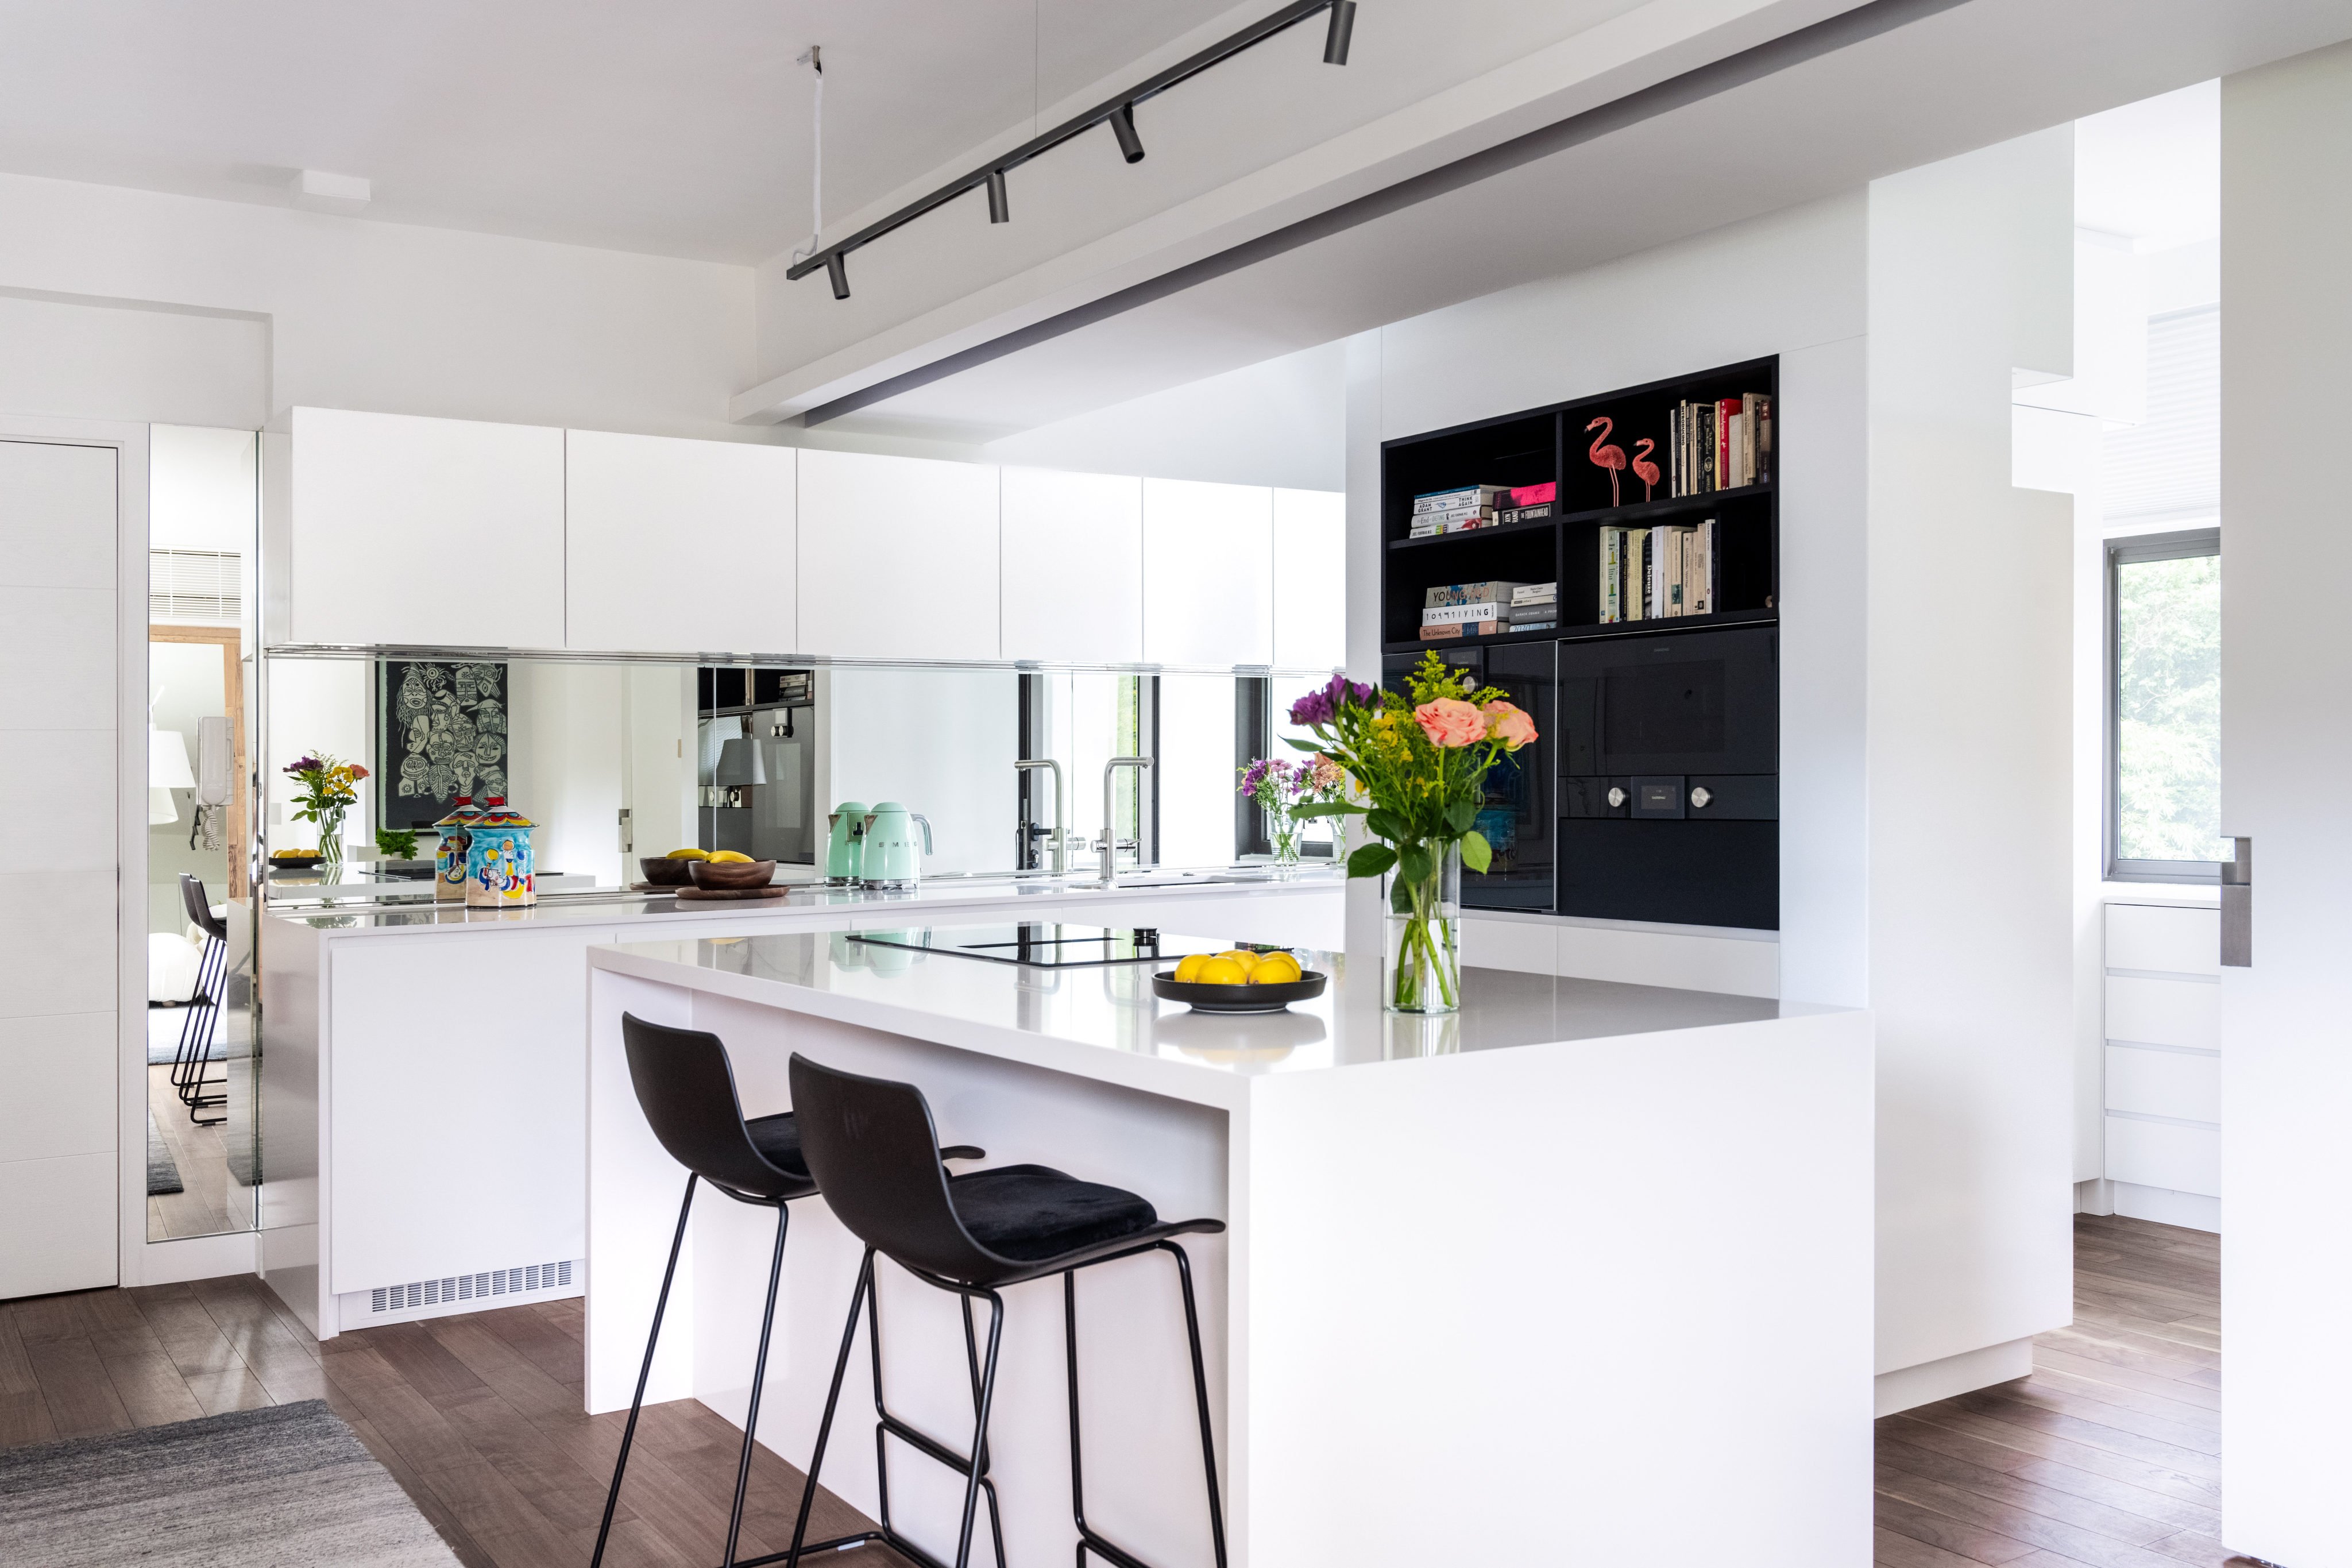 The kitchen space is organised around a central island. Stylist: Flavia Markovits. Photo: Eugene Chan